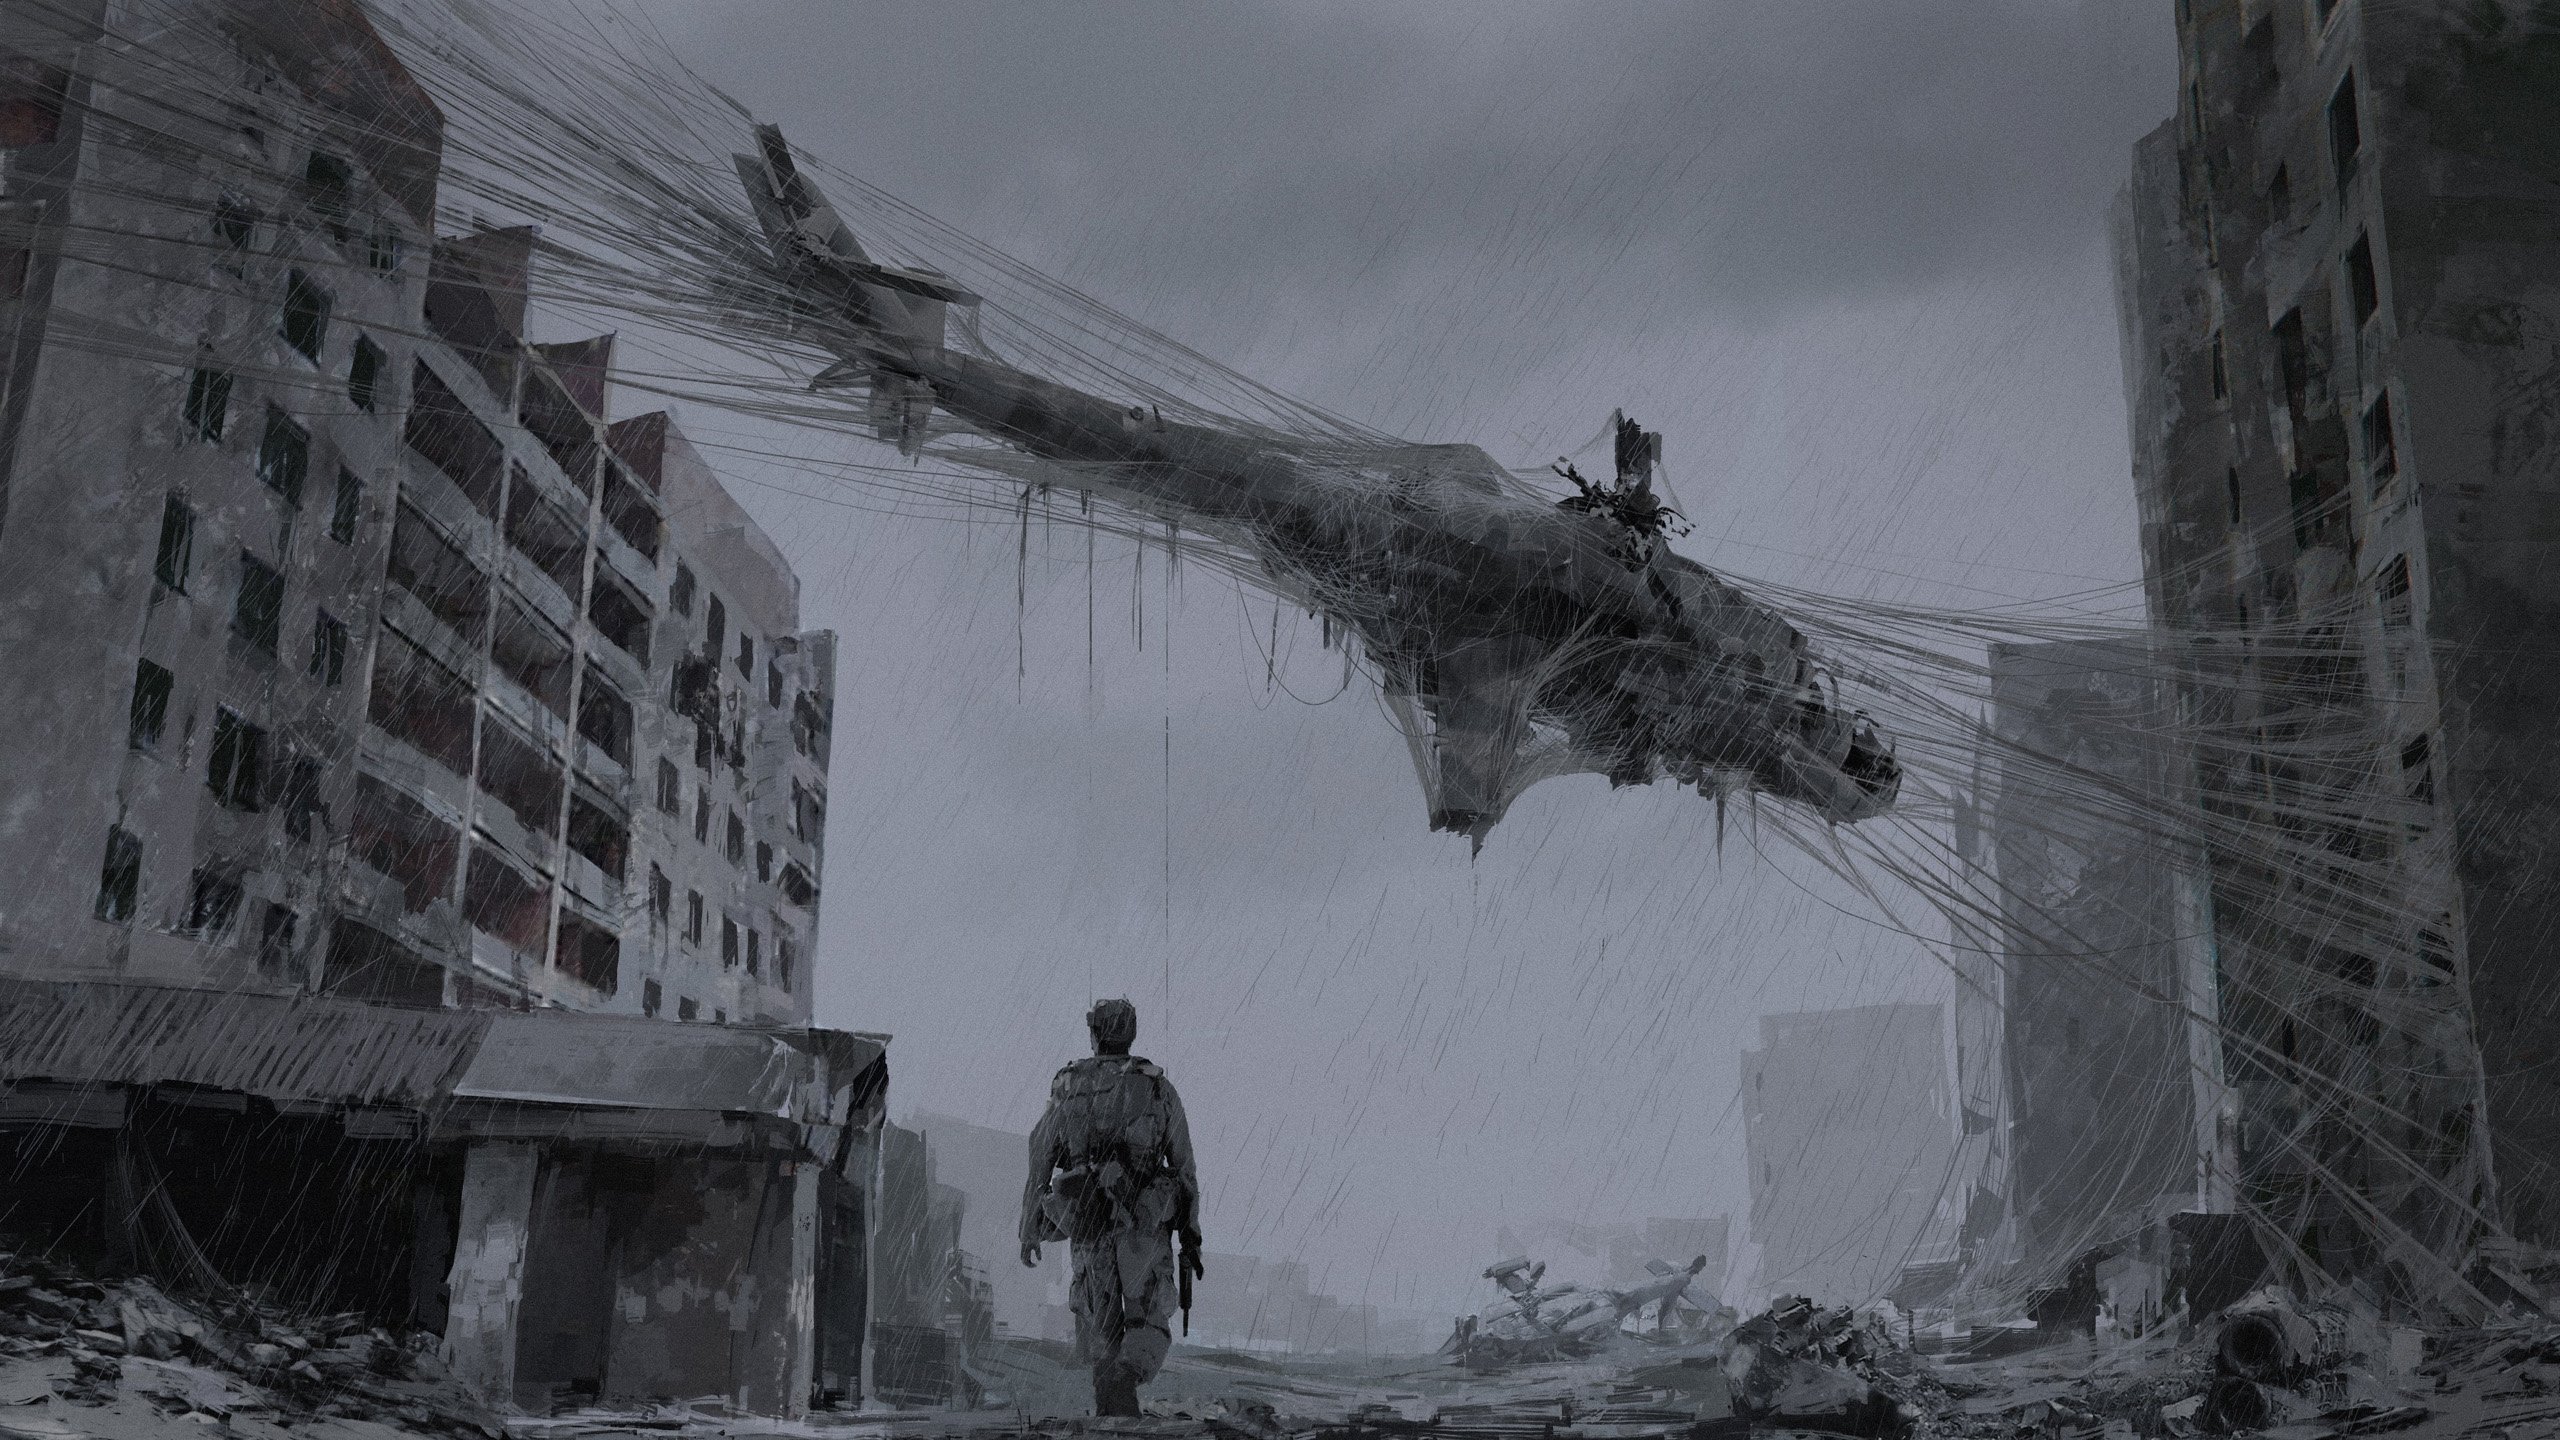 General 2560x1440 creepy helicopters fantasy art